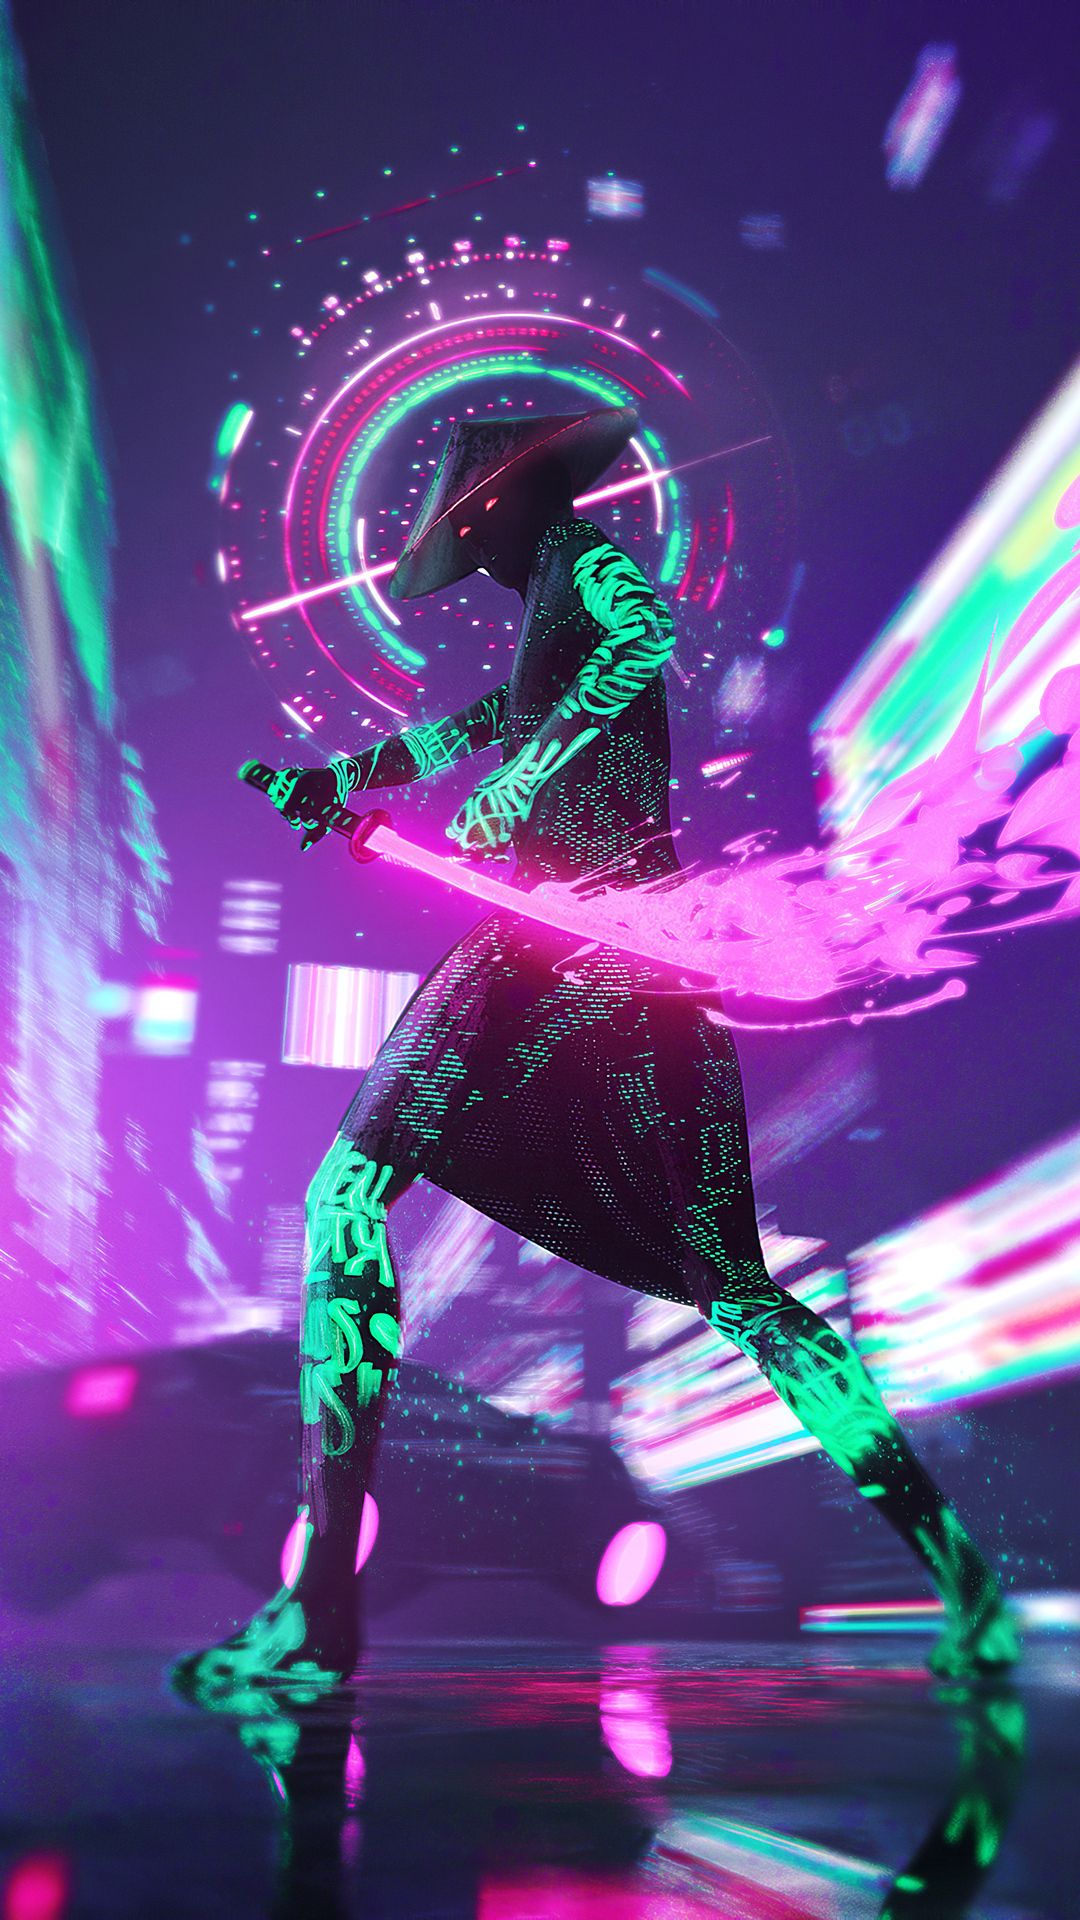 Cyberpunk Neon With Sword 4k iPhone 6s, 6 Plus, Pixel xl , One Plus 3t, 5 HD 4k Wallpaper, Image, Background, Photo and Picture